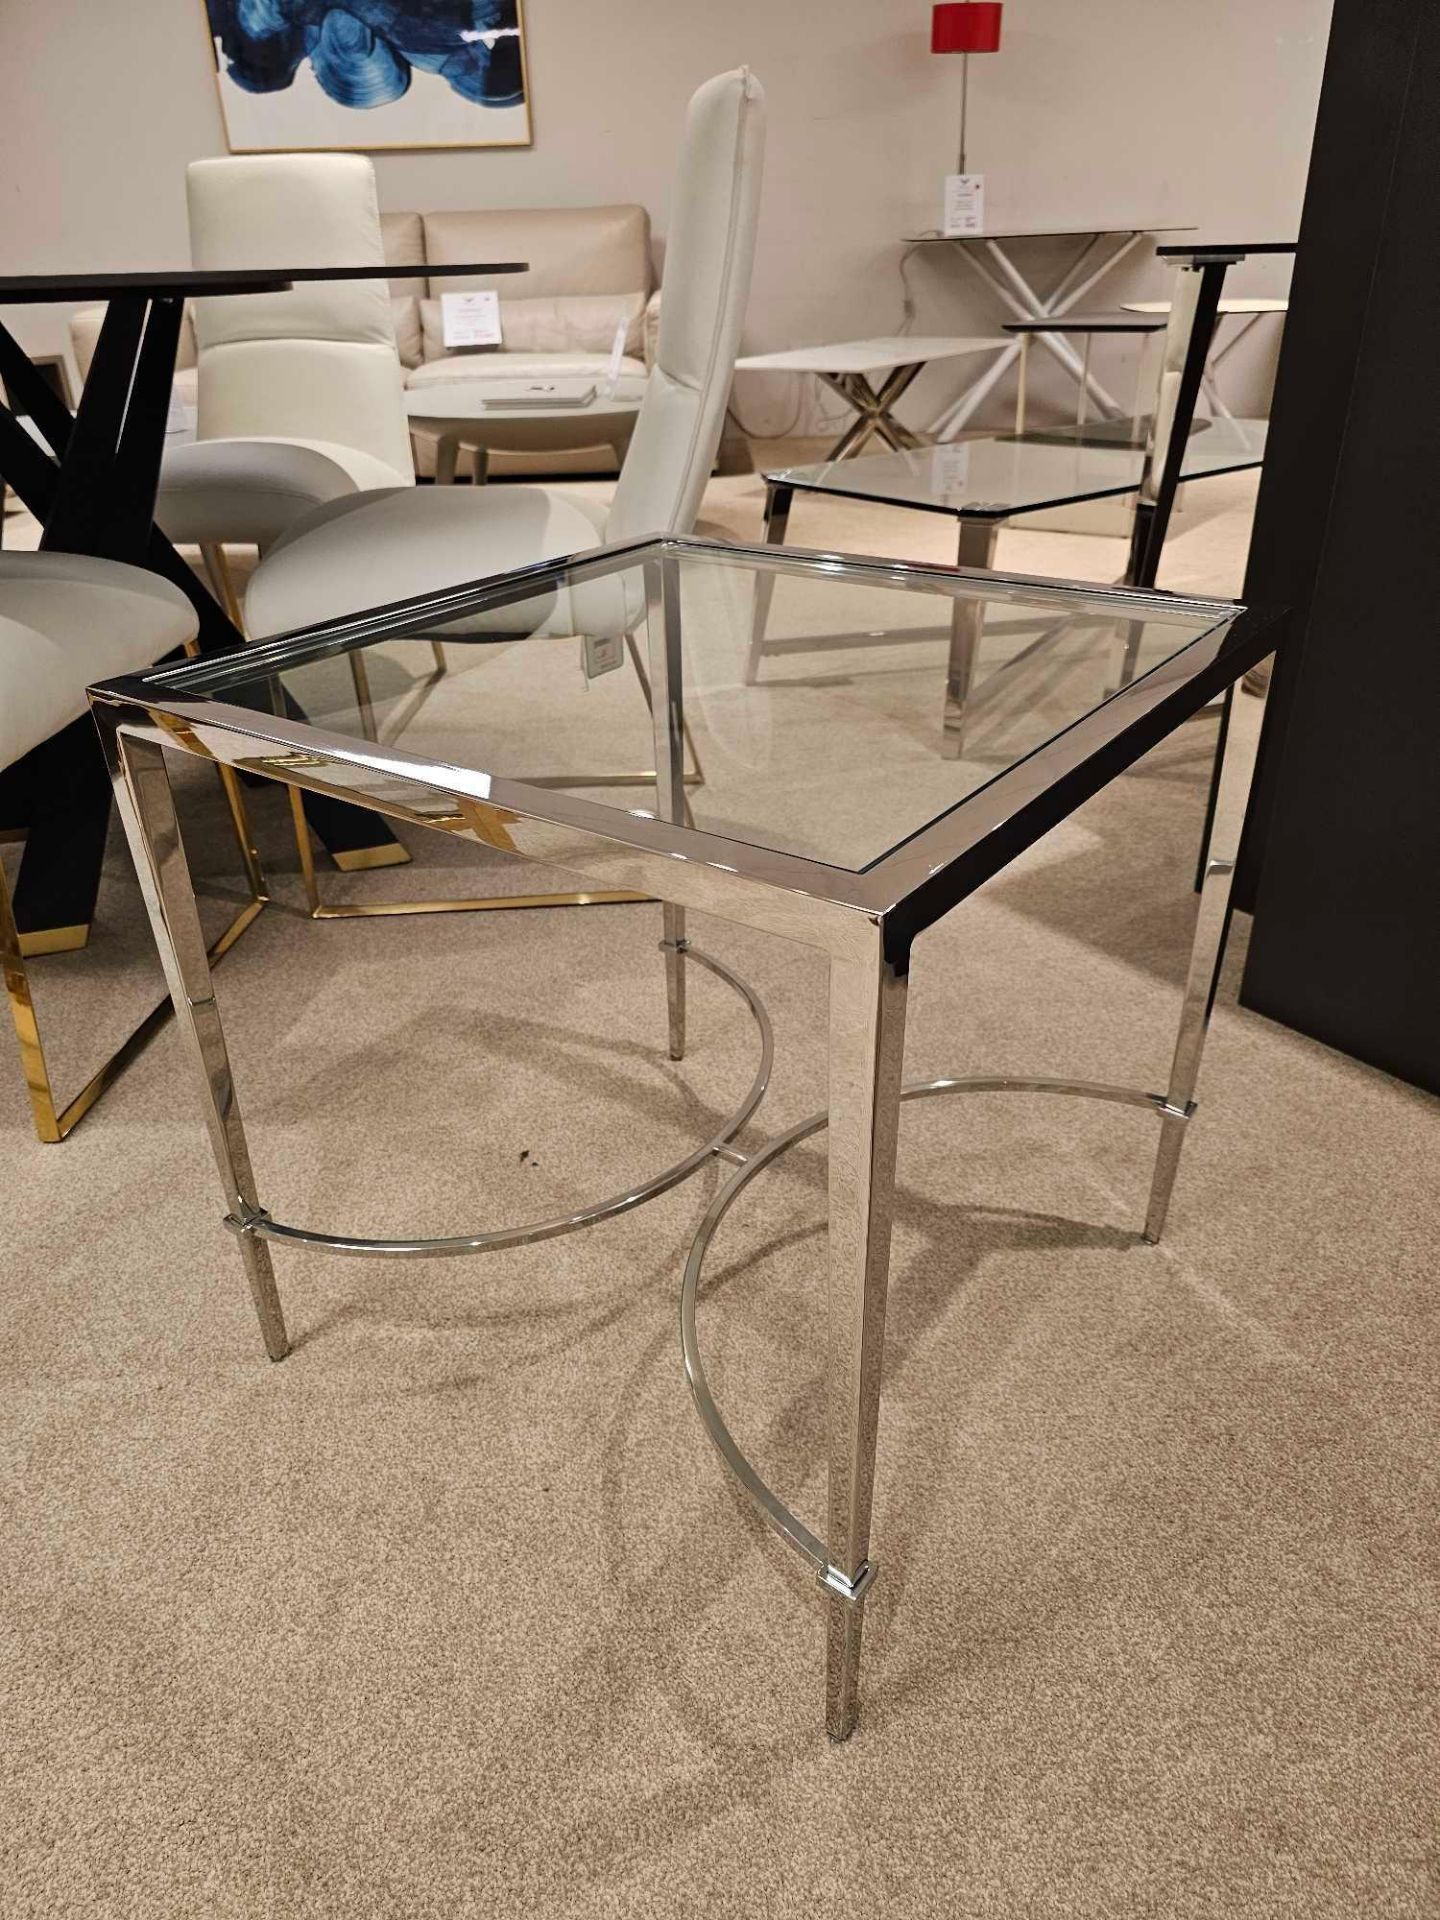 Tokyo Lamp Table by Kesterport The Tokyo lamp table with its clear glass top and a refined tapered - Image 2 of 5